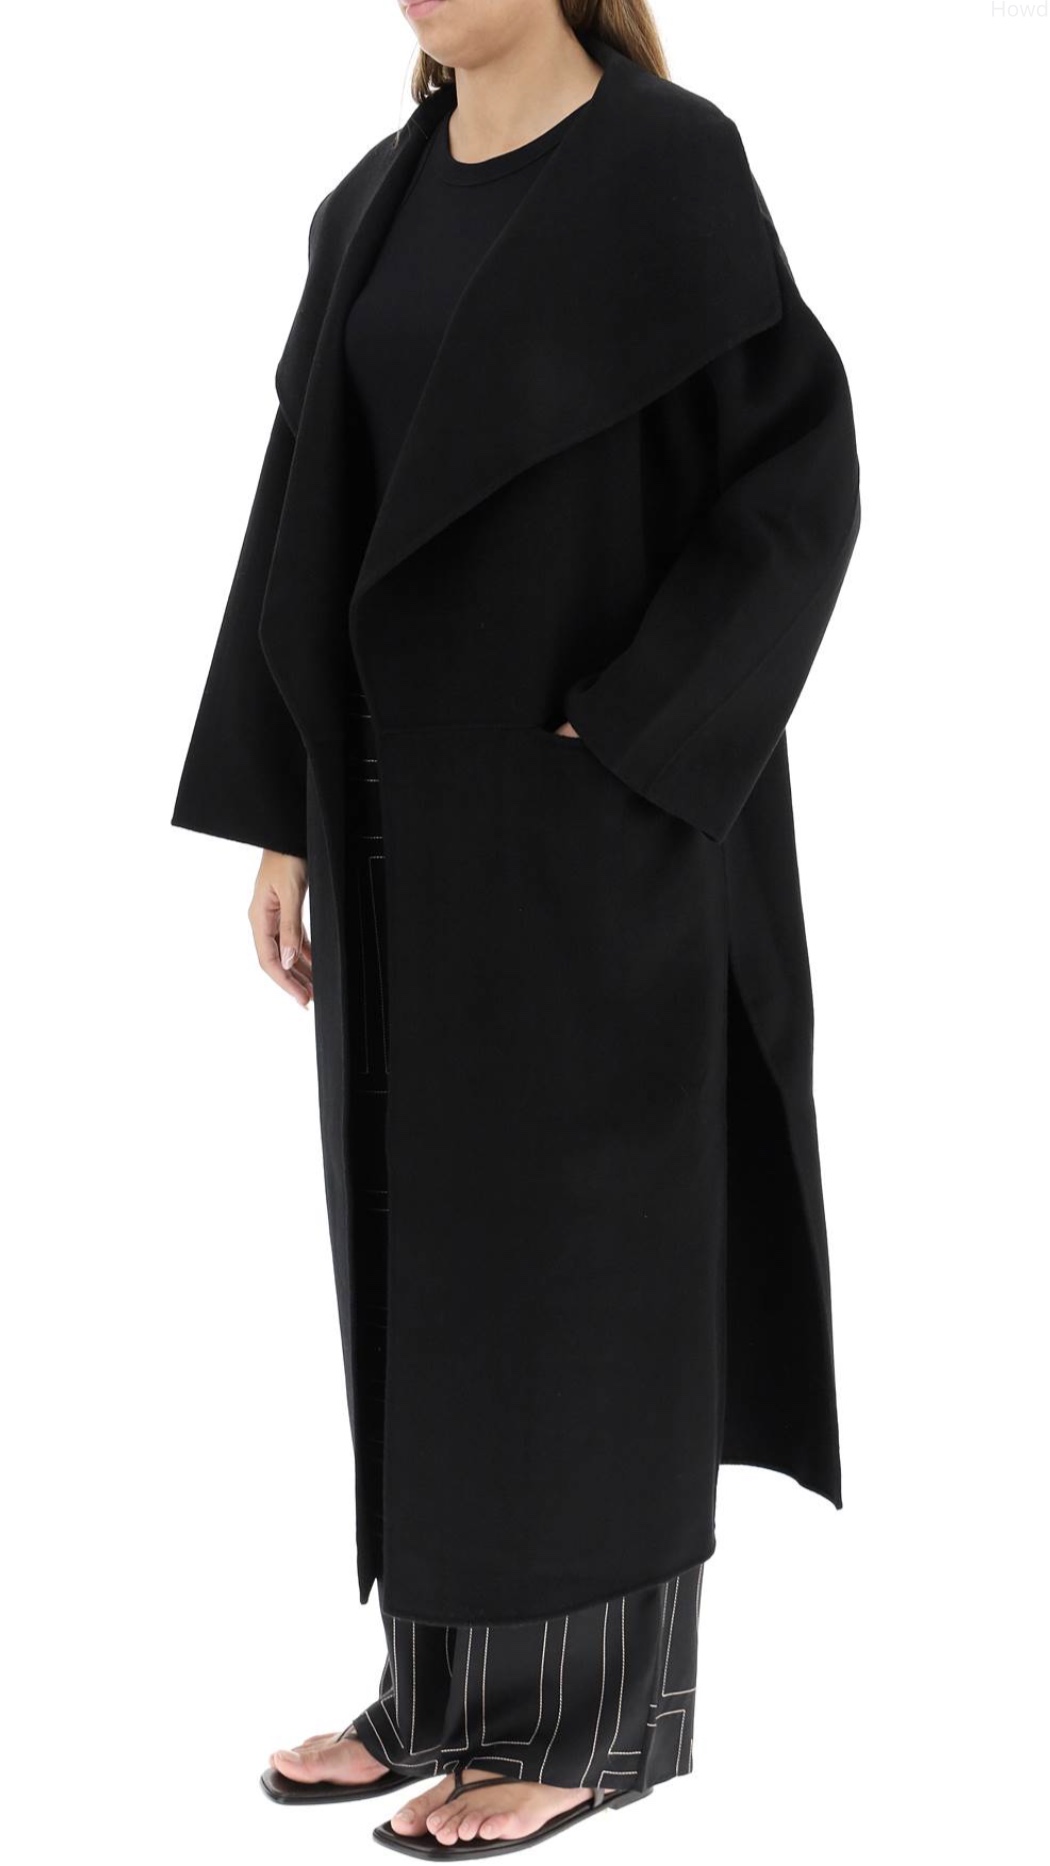 Cashmere Wool Coat By Toteme